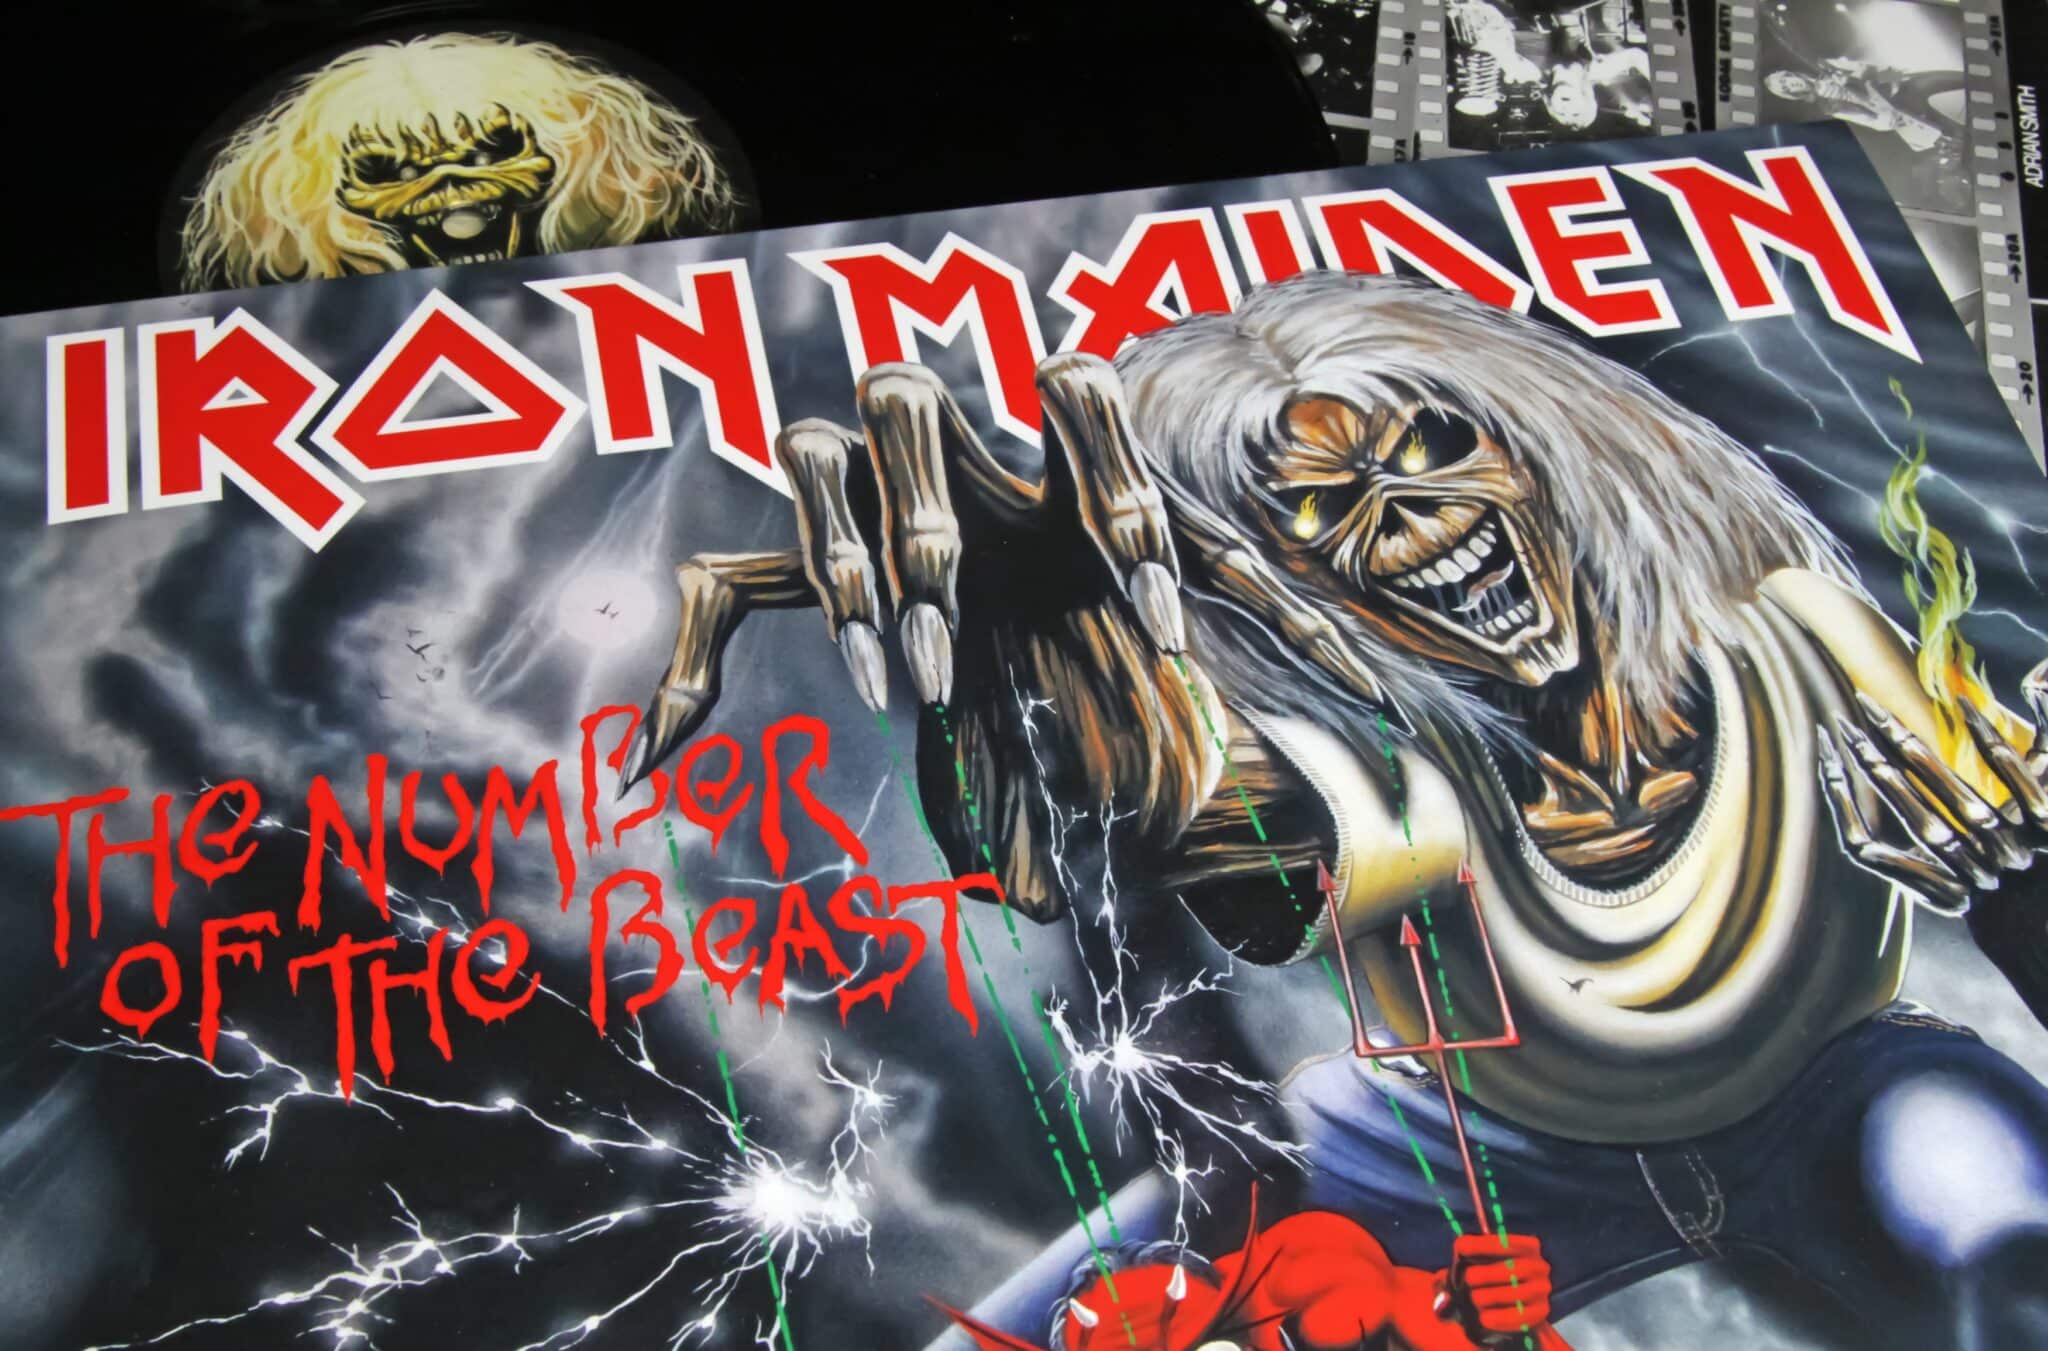 <p>Number of the Beast by Iron Maiden is a surprising addition to a road trip playlist, but it will get your heart racing and your adrenaline pumping. The heavy metal masterpiece is a classic and is perfect for a long drive on the highway with the windows down, and the volume turned up.</p>